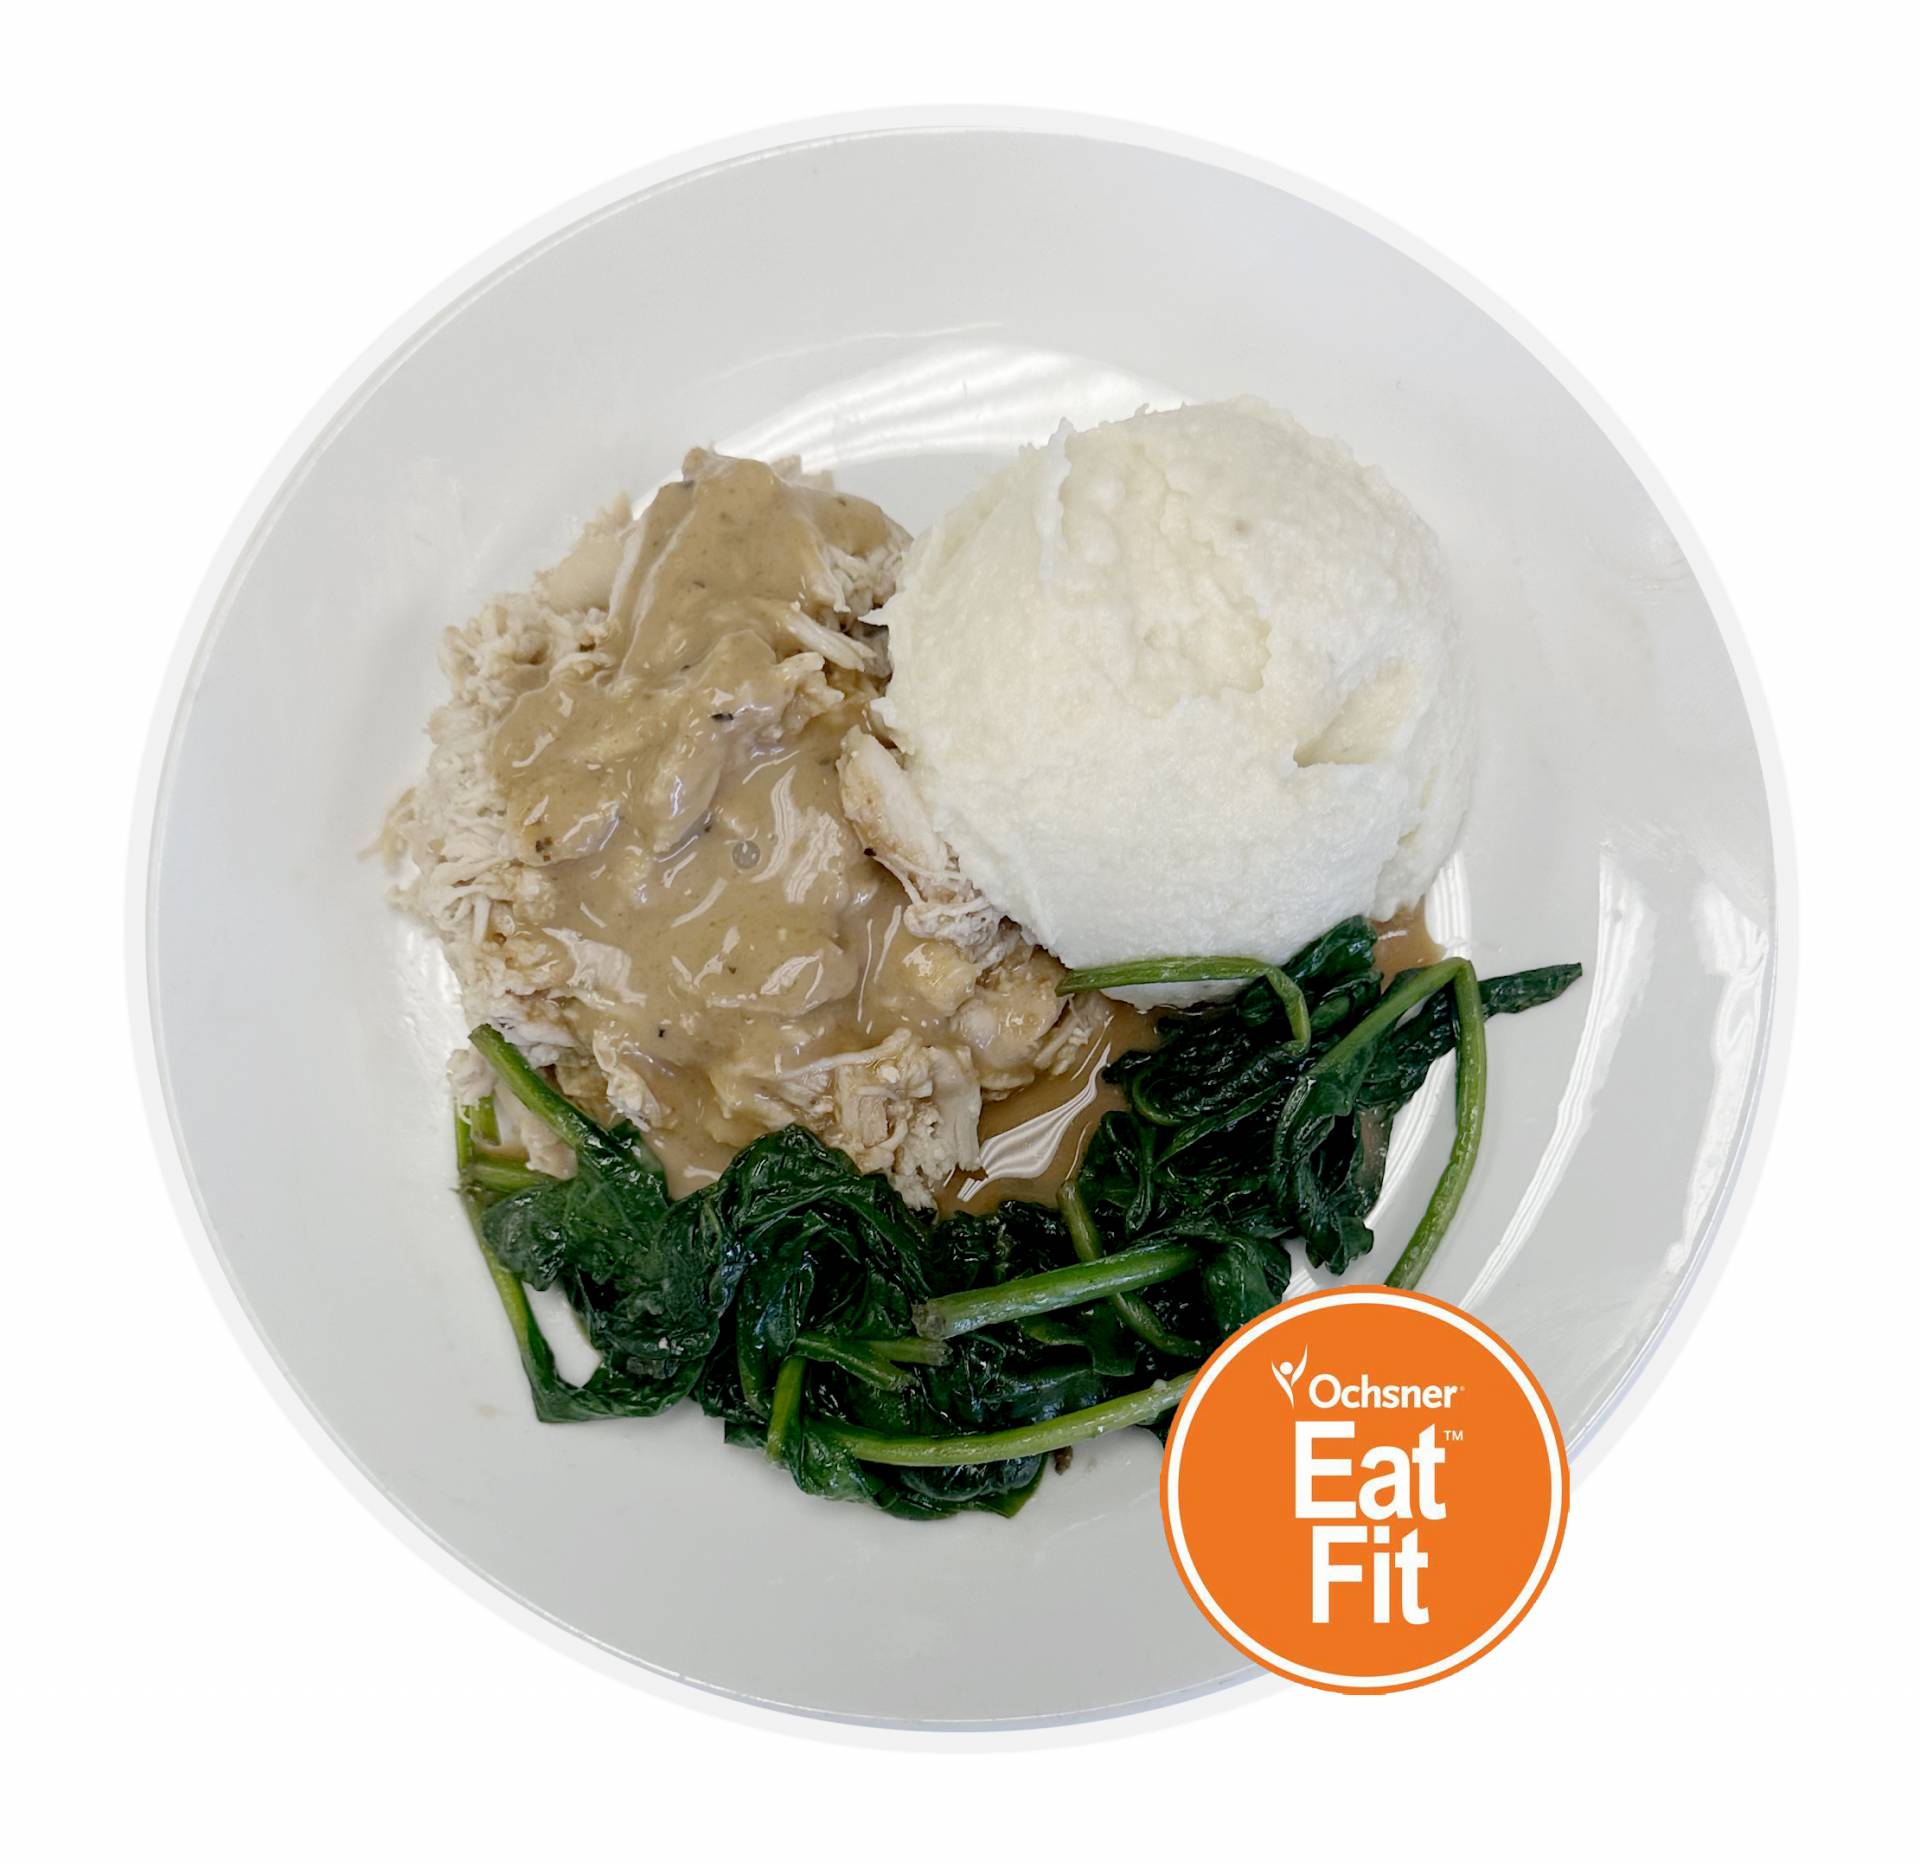 Smothered Chicken with Brown Gravy, Cauliflower Mashed Potatoes and Spinach - Low Fat